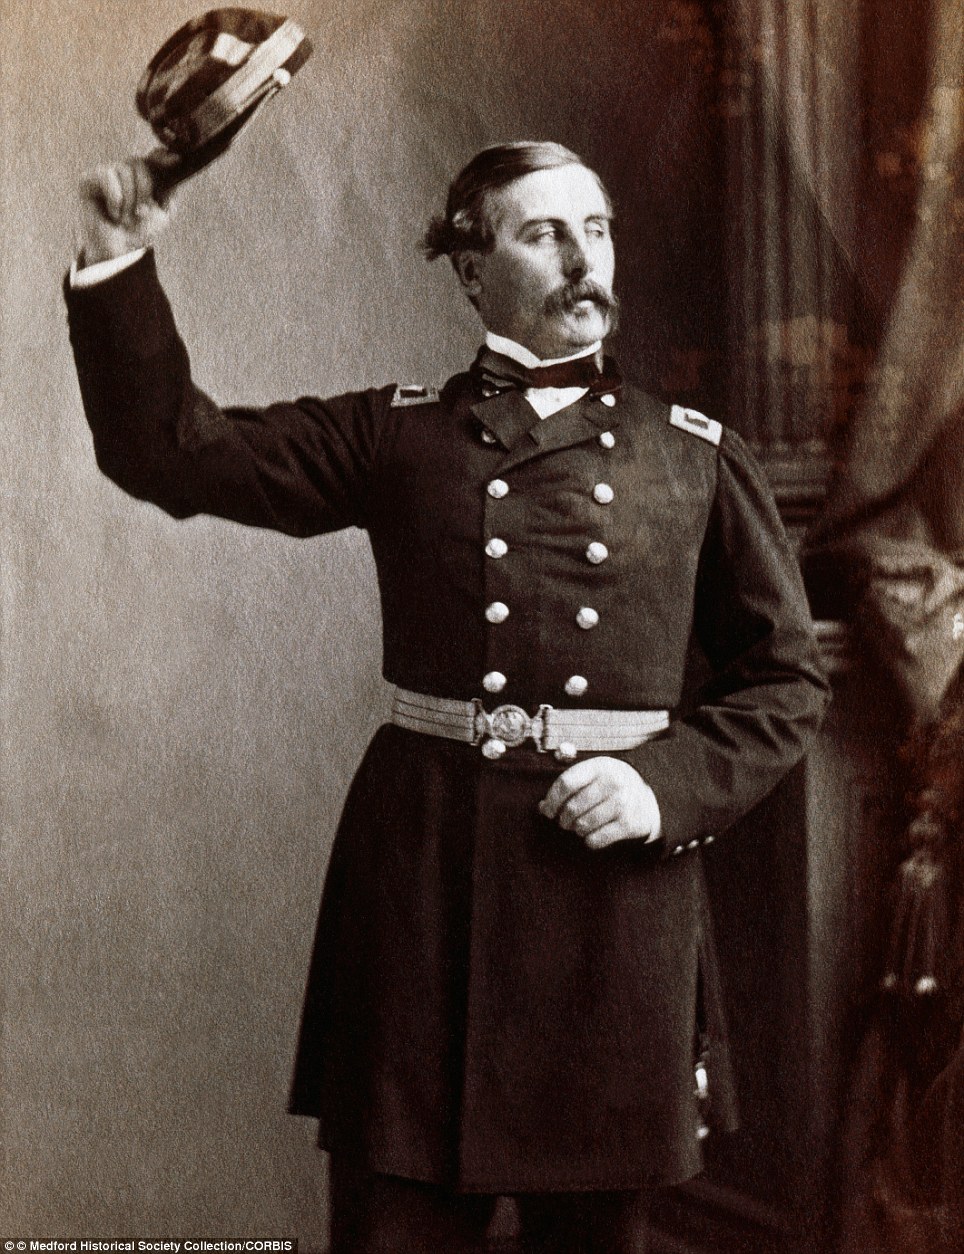 A portrait of Brigadier General Thomas Francis Meagher (1823-1867), commander of Meagher